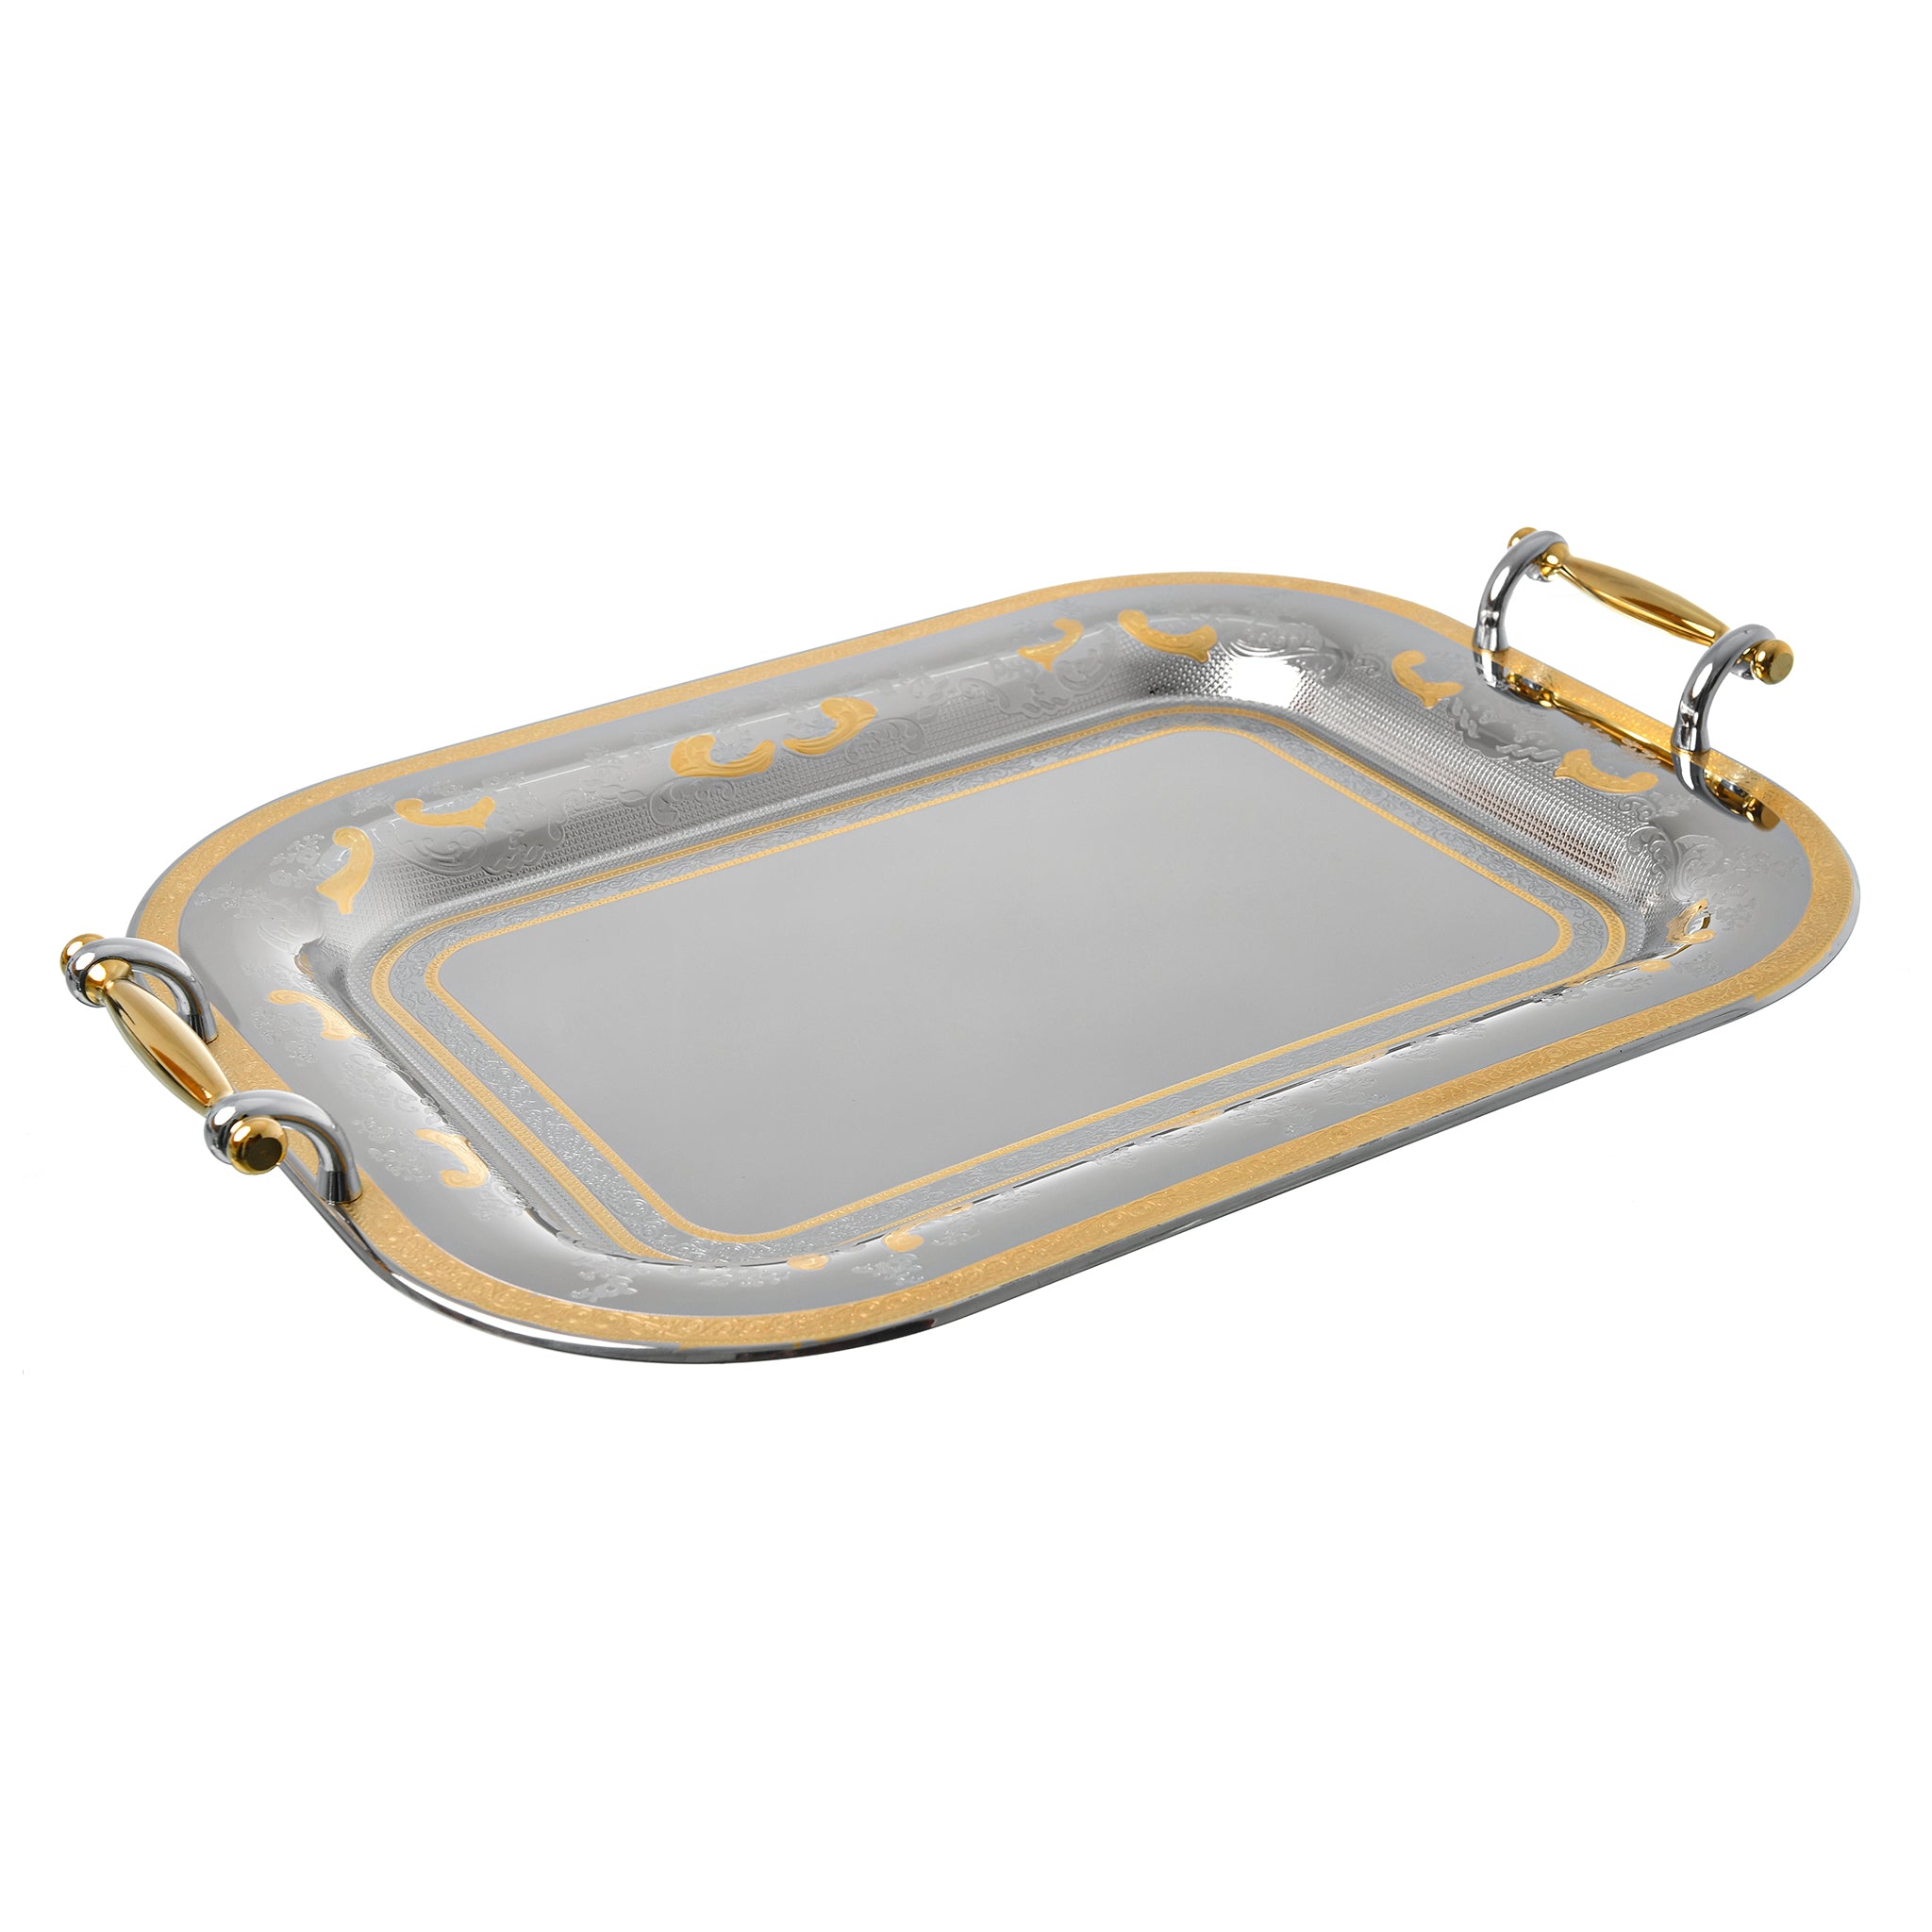 Elegant Gioiel - Rectangular Tray with Handles - Gold - Stainless Steel 18/10 - 50cm - 75000417